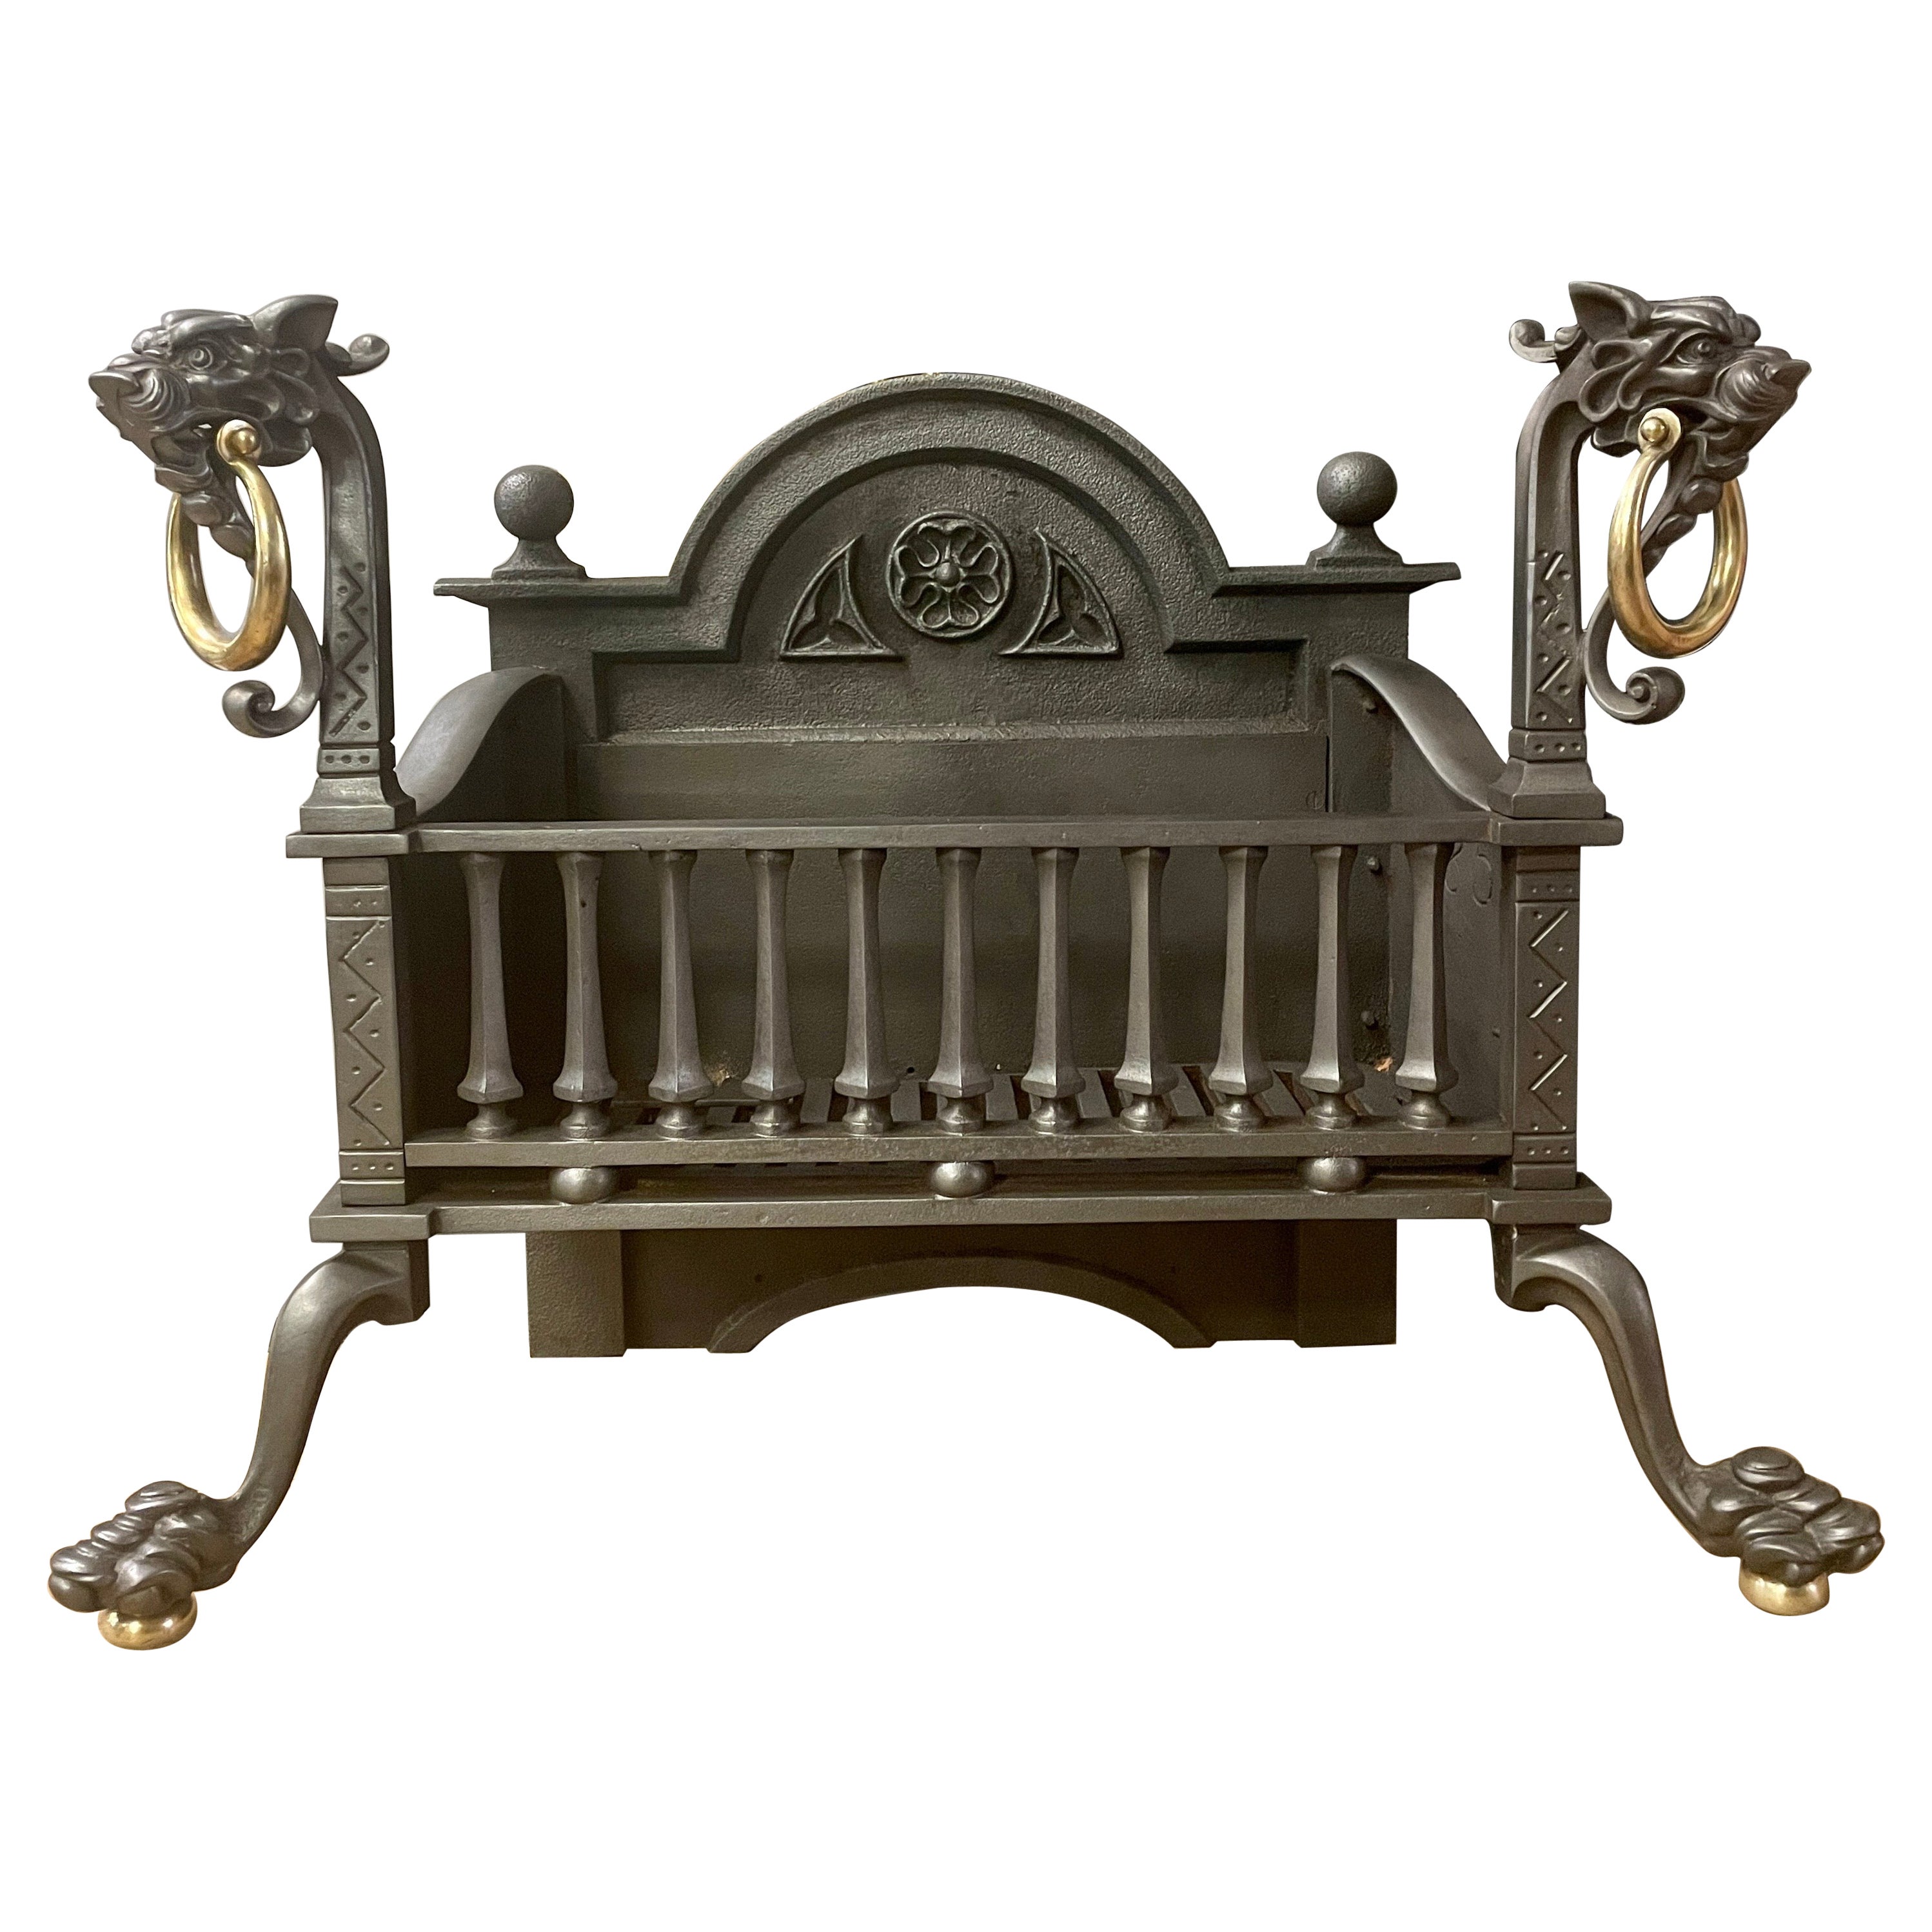 Antique English Cast Iron Dragon Fire Grate For Sale at 1stDibs